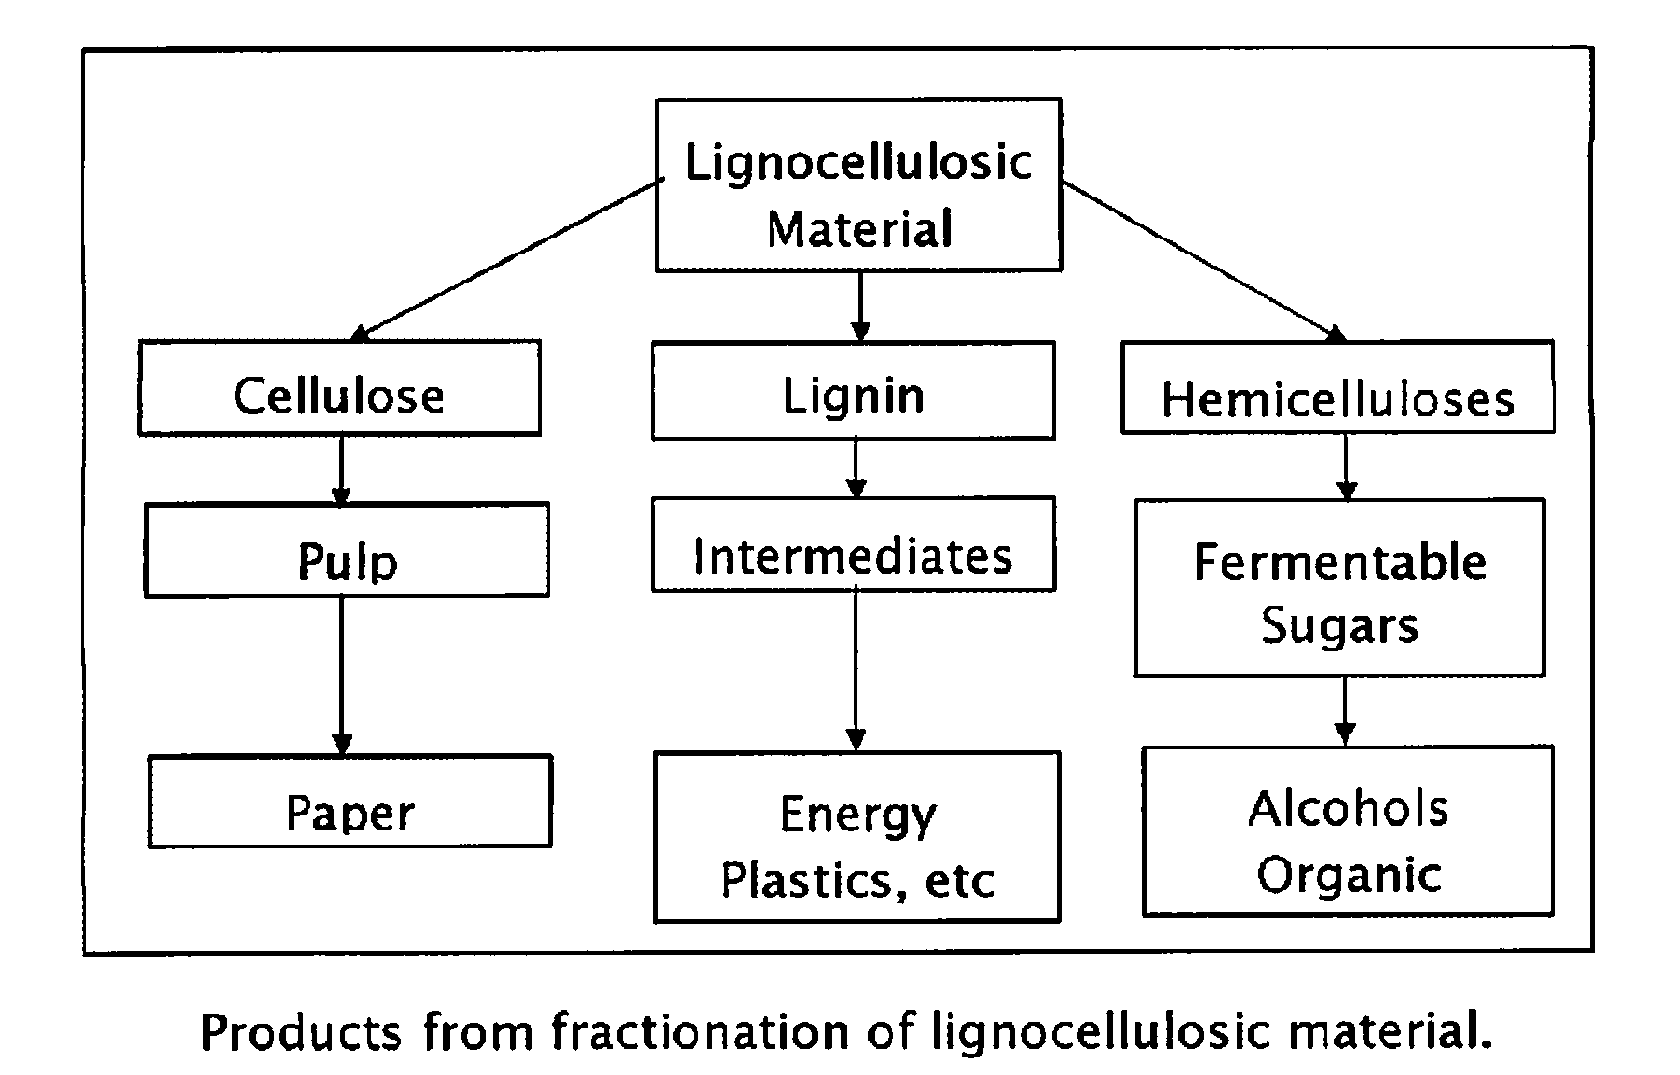 Method for the production of fermentable sugars and cellulose from lignocellulosic material